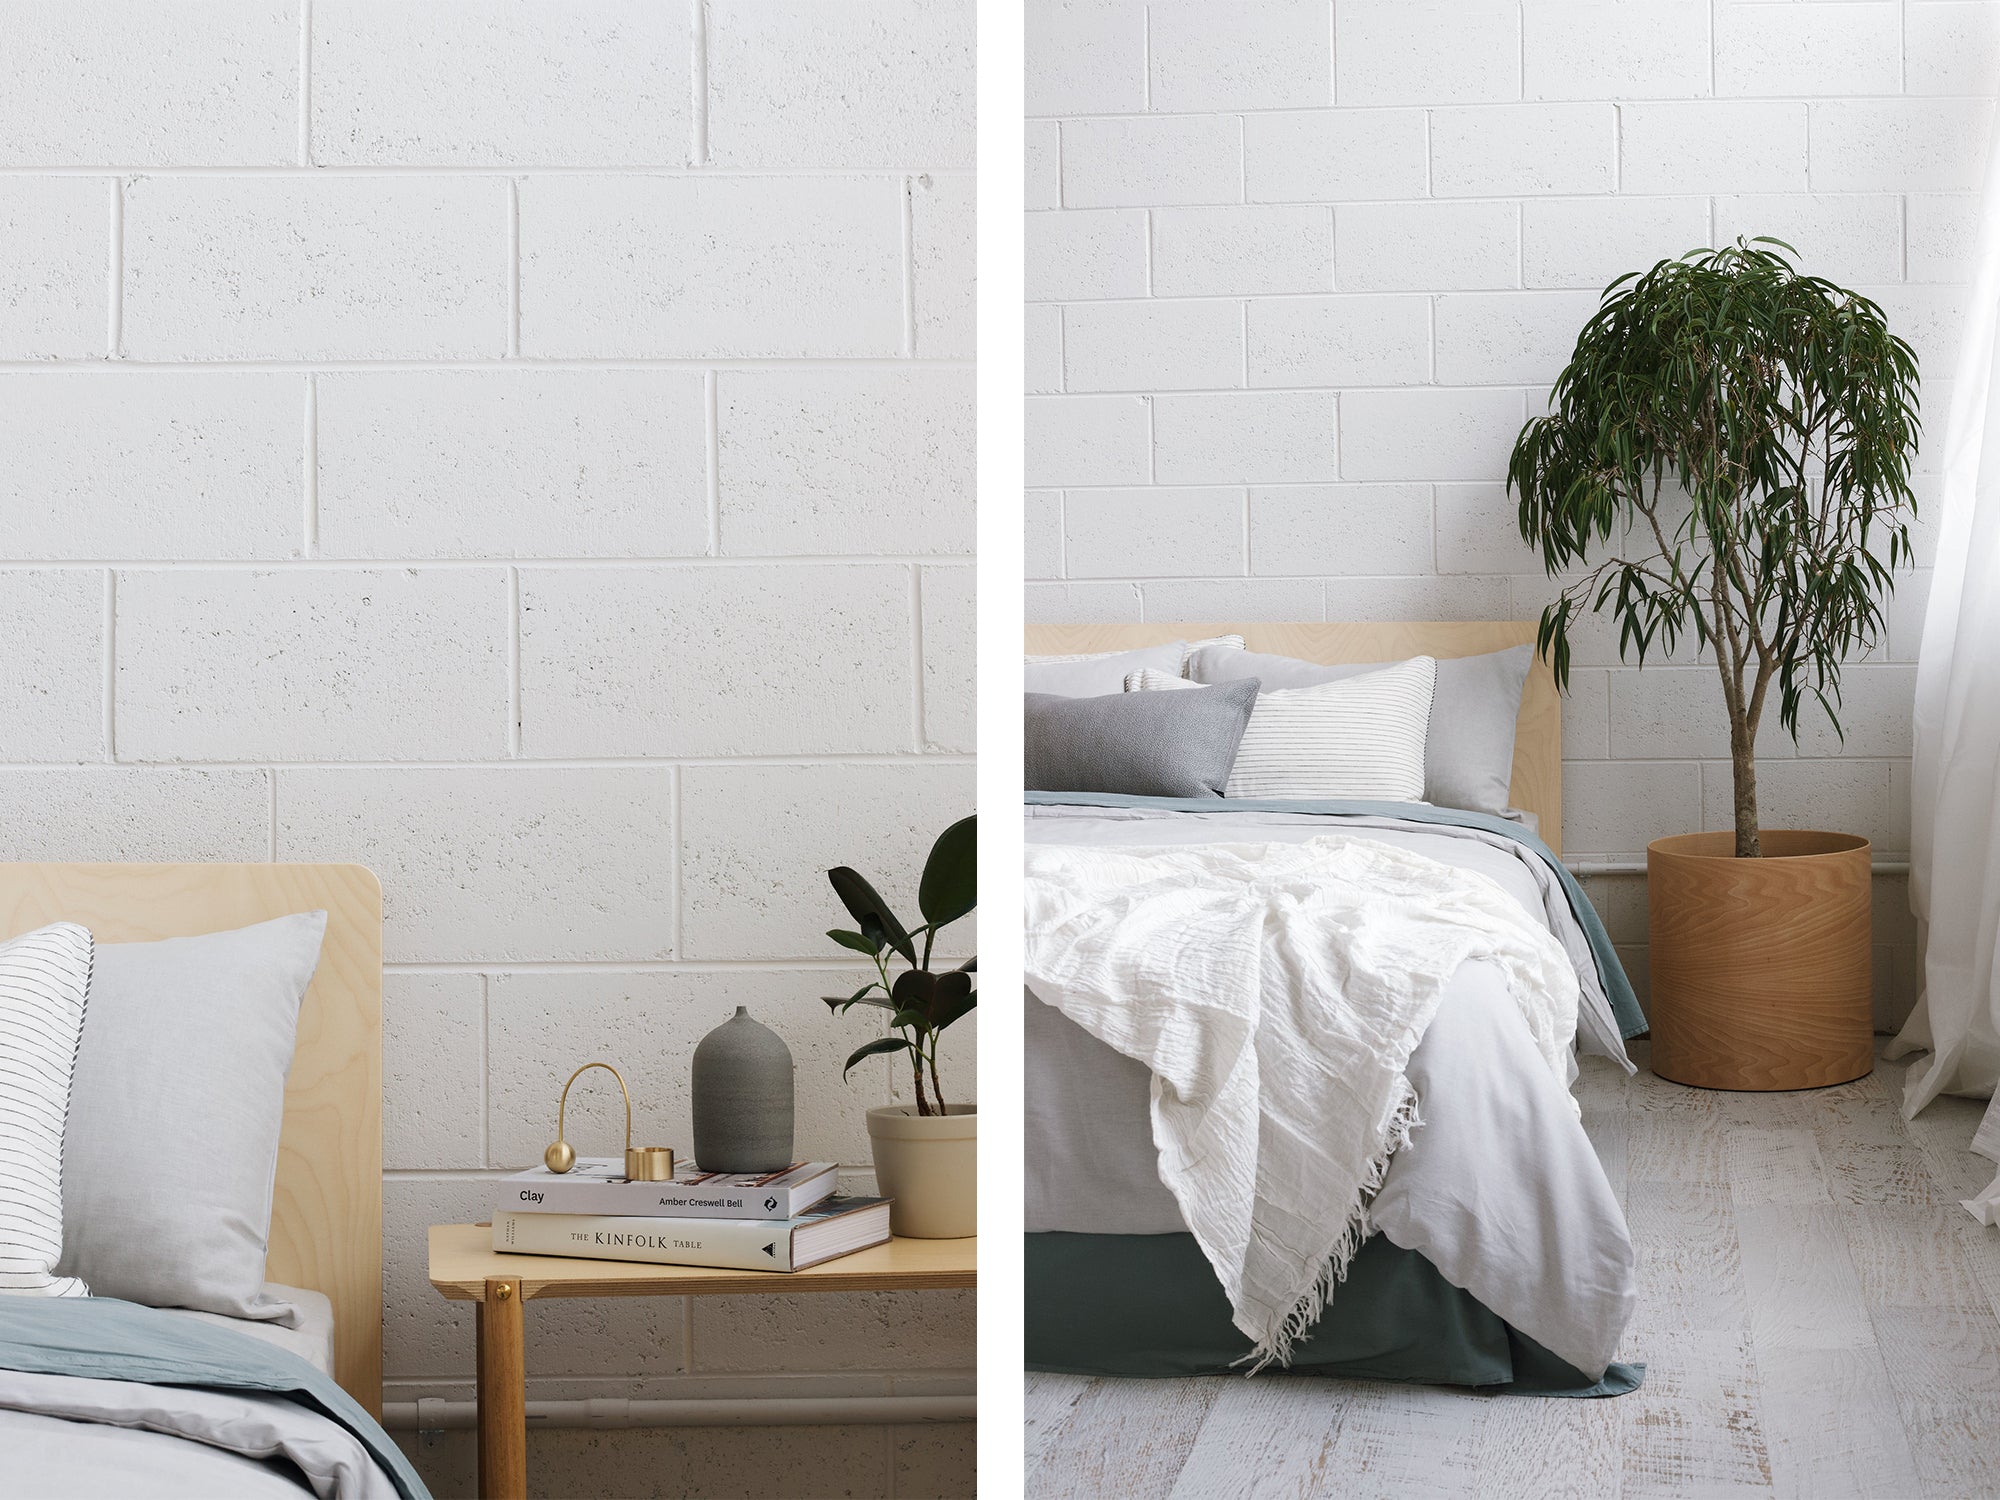  Styling Tips for a Minimalist Bedroom by Windy Phan